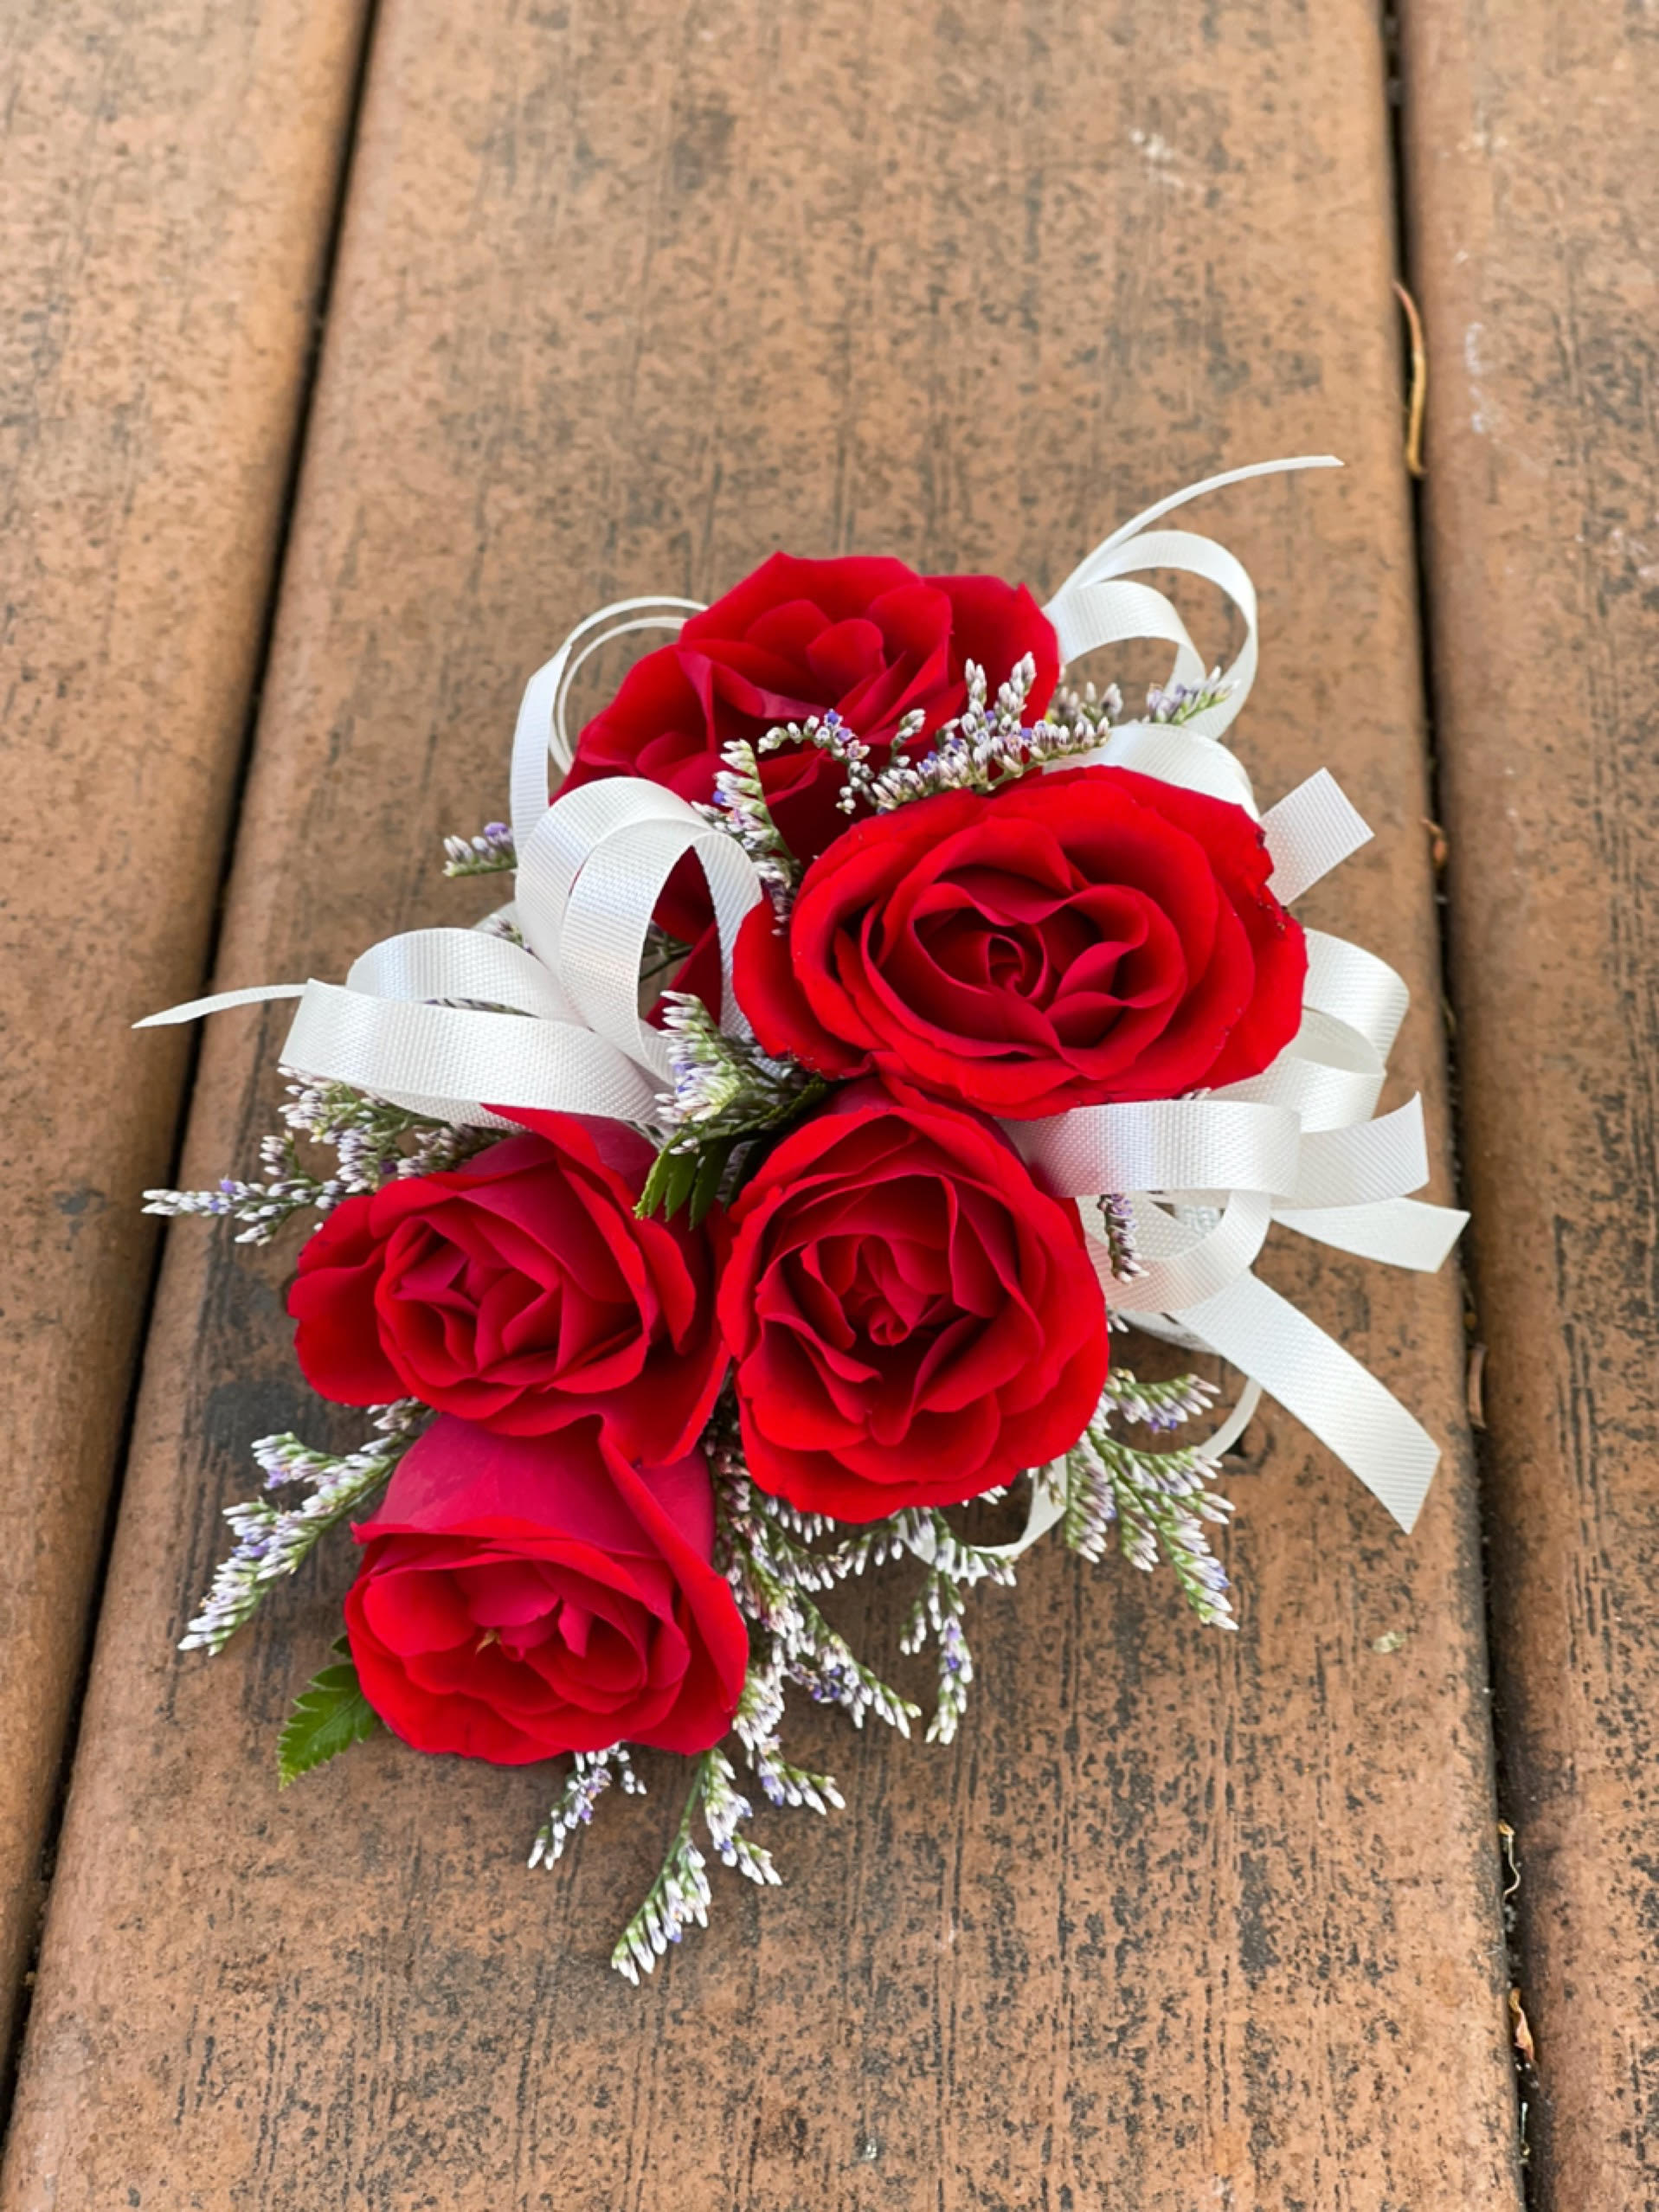 Wrist Corsage (Red Flowers &amp; White Ribbon) - (IN STORE PICKUP ONLY!) -Color change can be requested in &quot;Special Instruction&quot; at check out. Spray Rose with Ribbon Measurement: Length 5 inch                         Width   3 inch  ===Copy and Paste below with input into Special Instruction to customize colors===                           &quot; Color Change                              Ribbon Color: &quot;